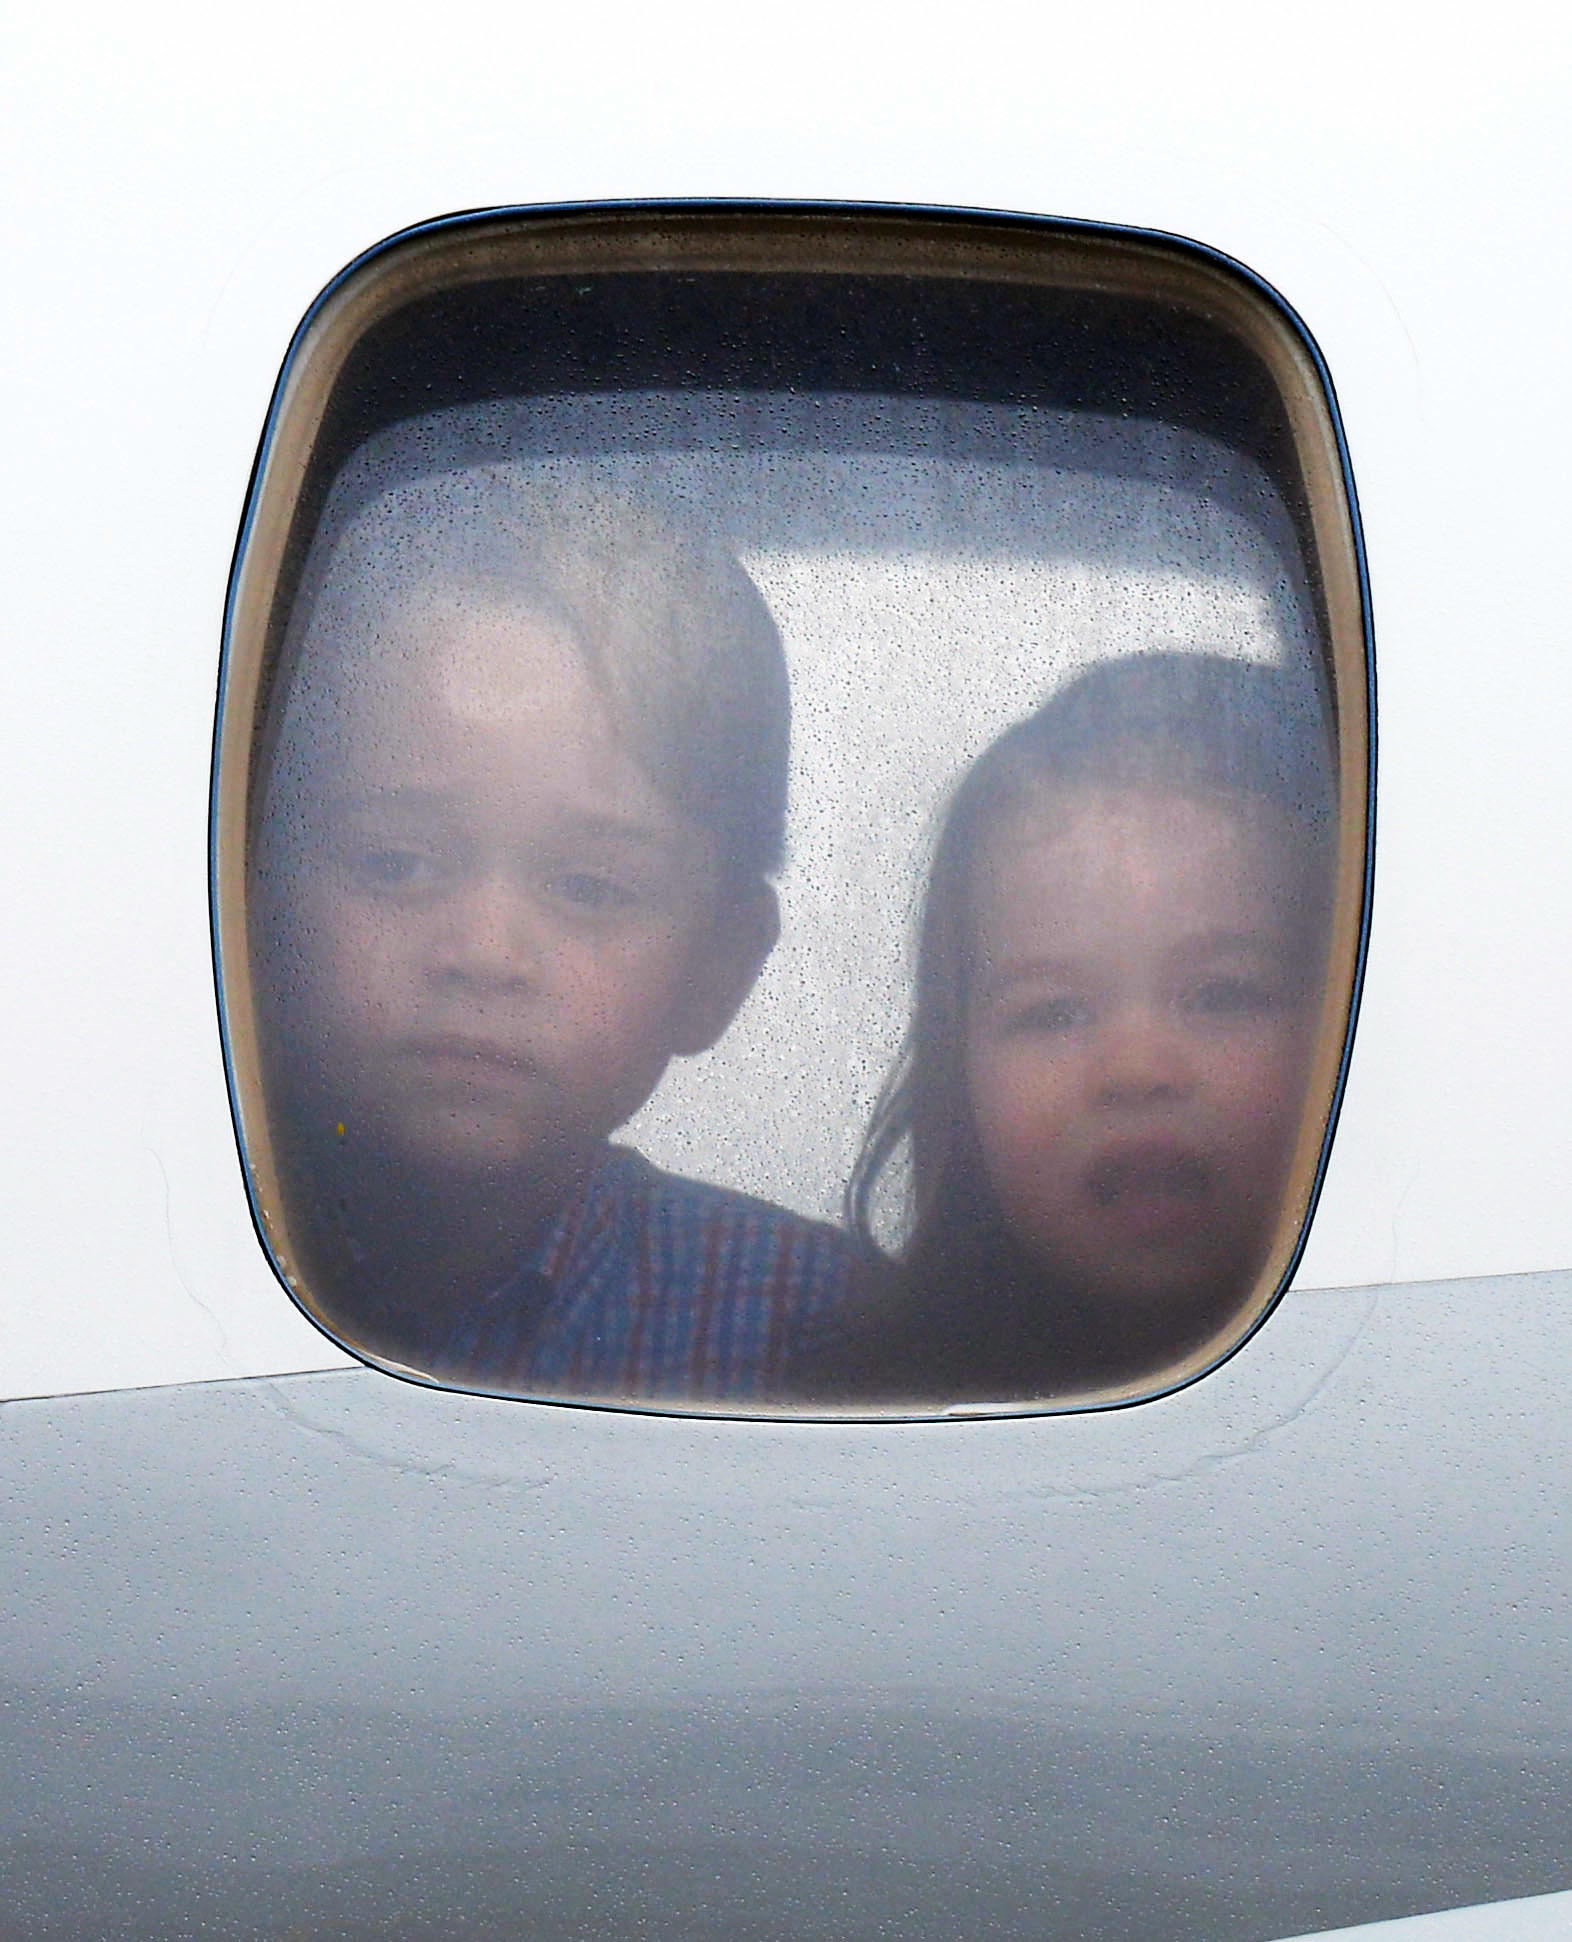 <p>Prince George and Princess Charlotte looked out the window of their Royal Air Force plane as they arrived in Warsaw, Poland, on July 17, 2017.</p>